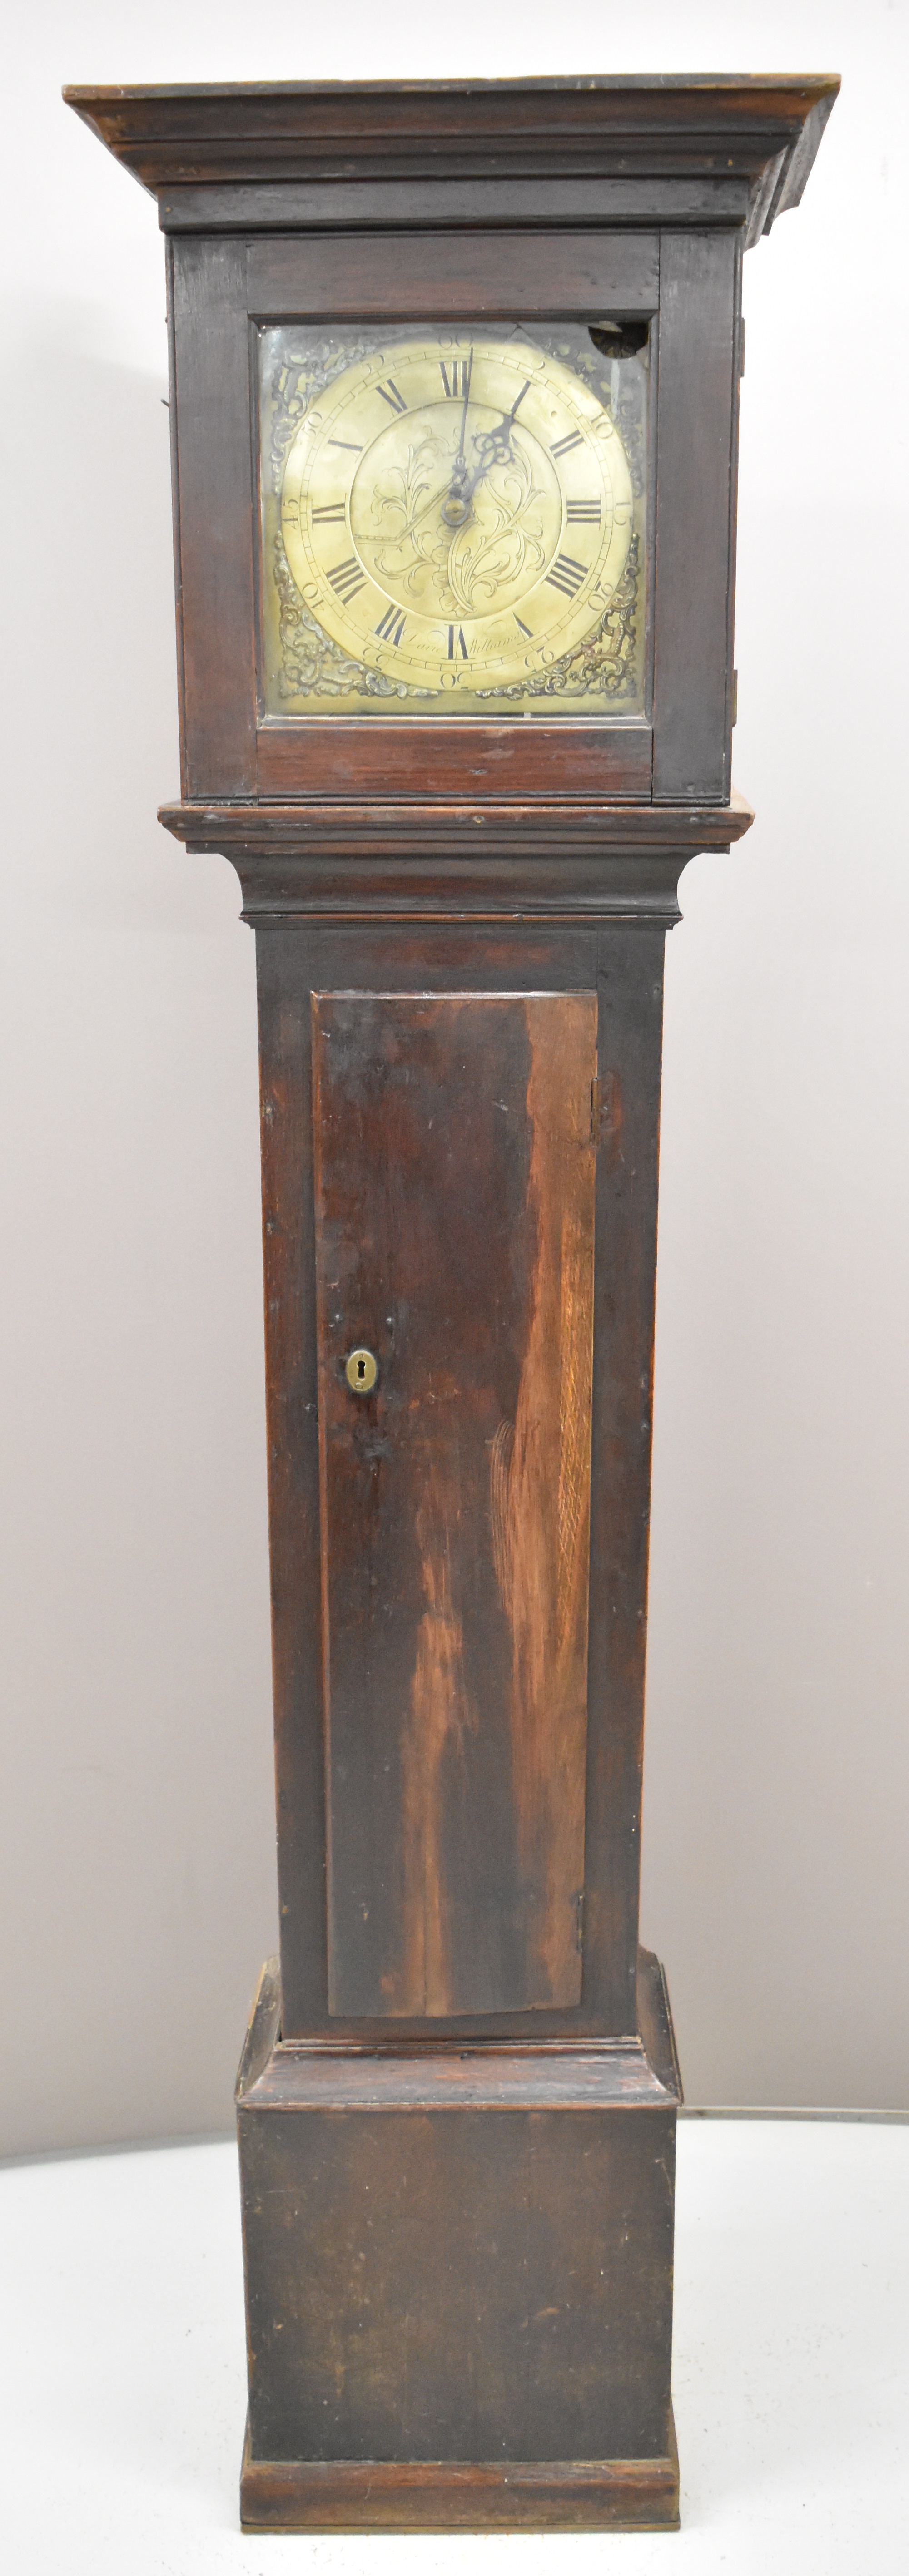 David Williams, likely Welsh and possibly Neath, oak cased, brass dial longcase clock, the thirty